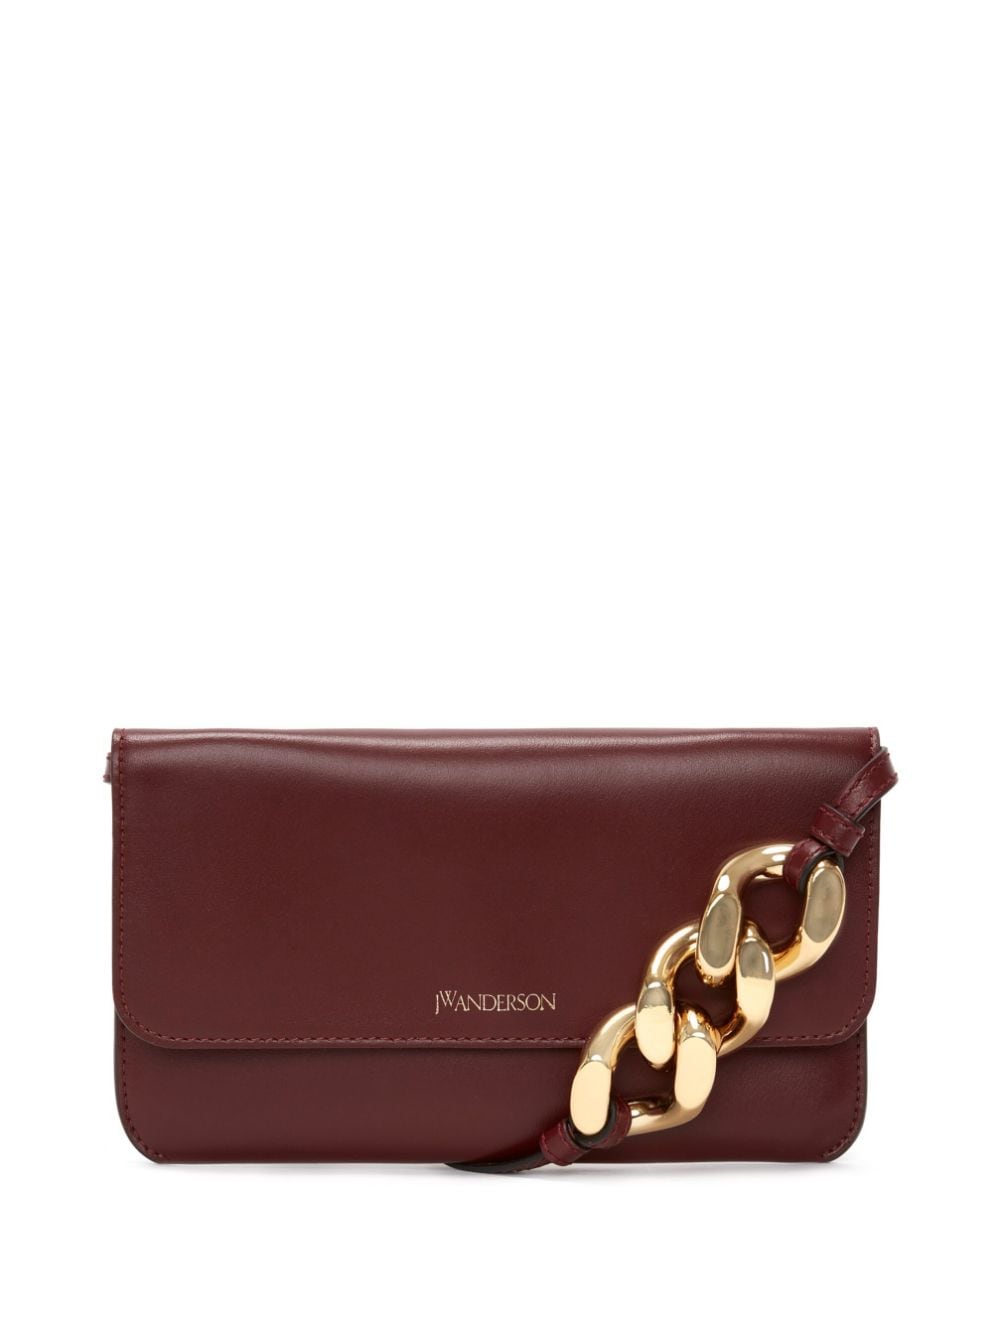 JW Anderson chain-detail pouch crossbody bag - Red